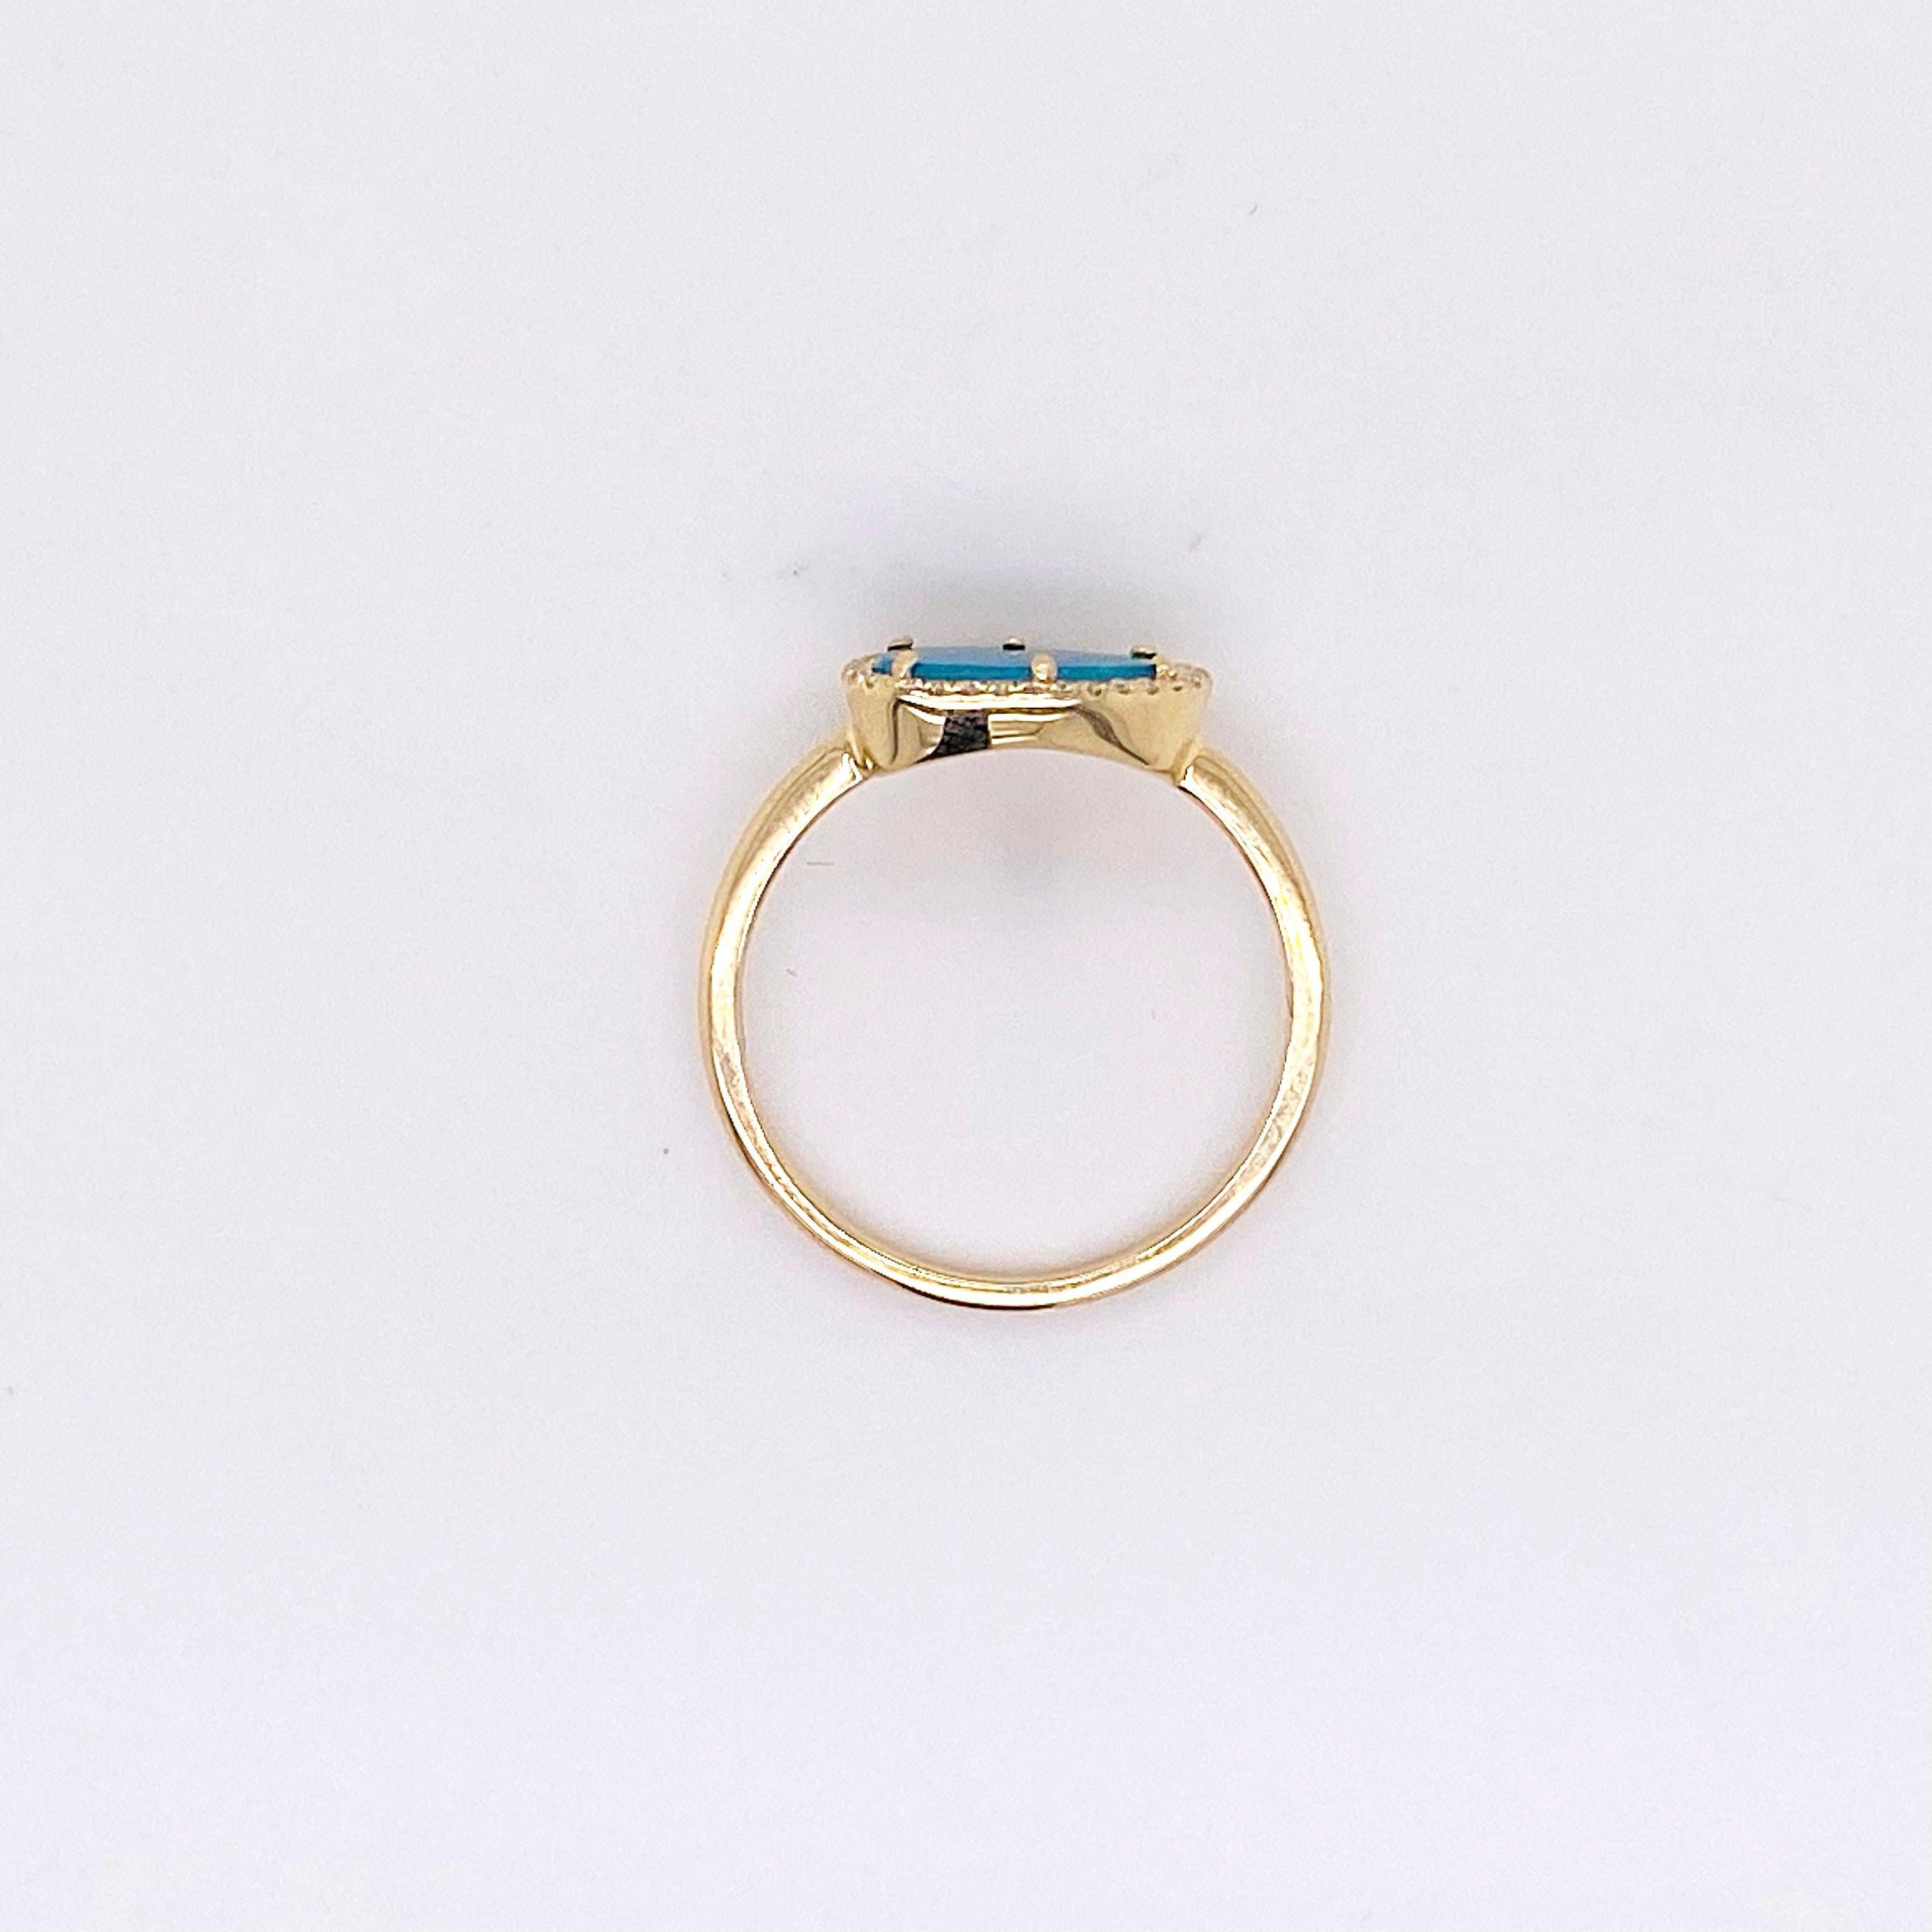 For Sale:  Opal and Diamond Halo Ring, Yellow Gold, Organic Shape Opal .88 Carat 5